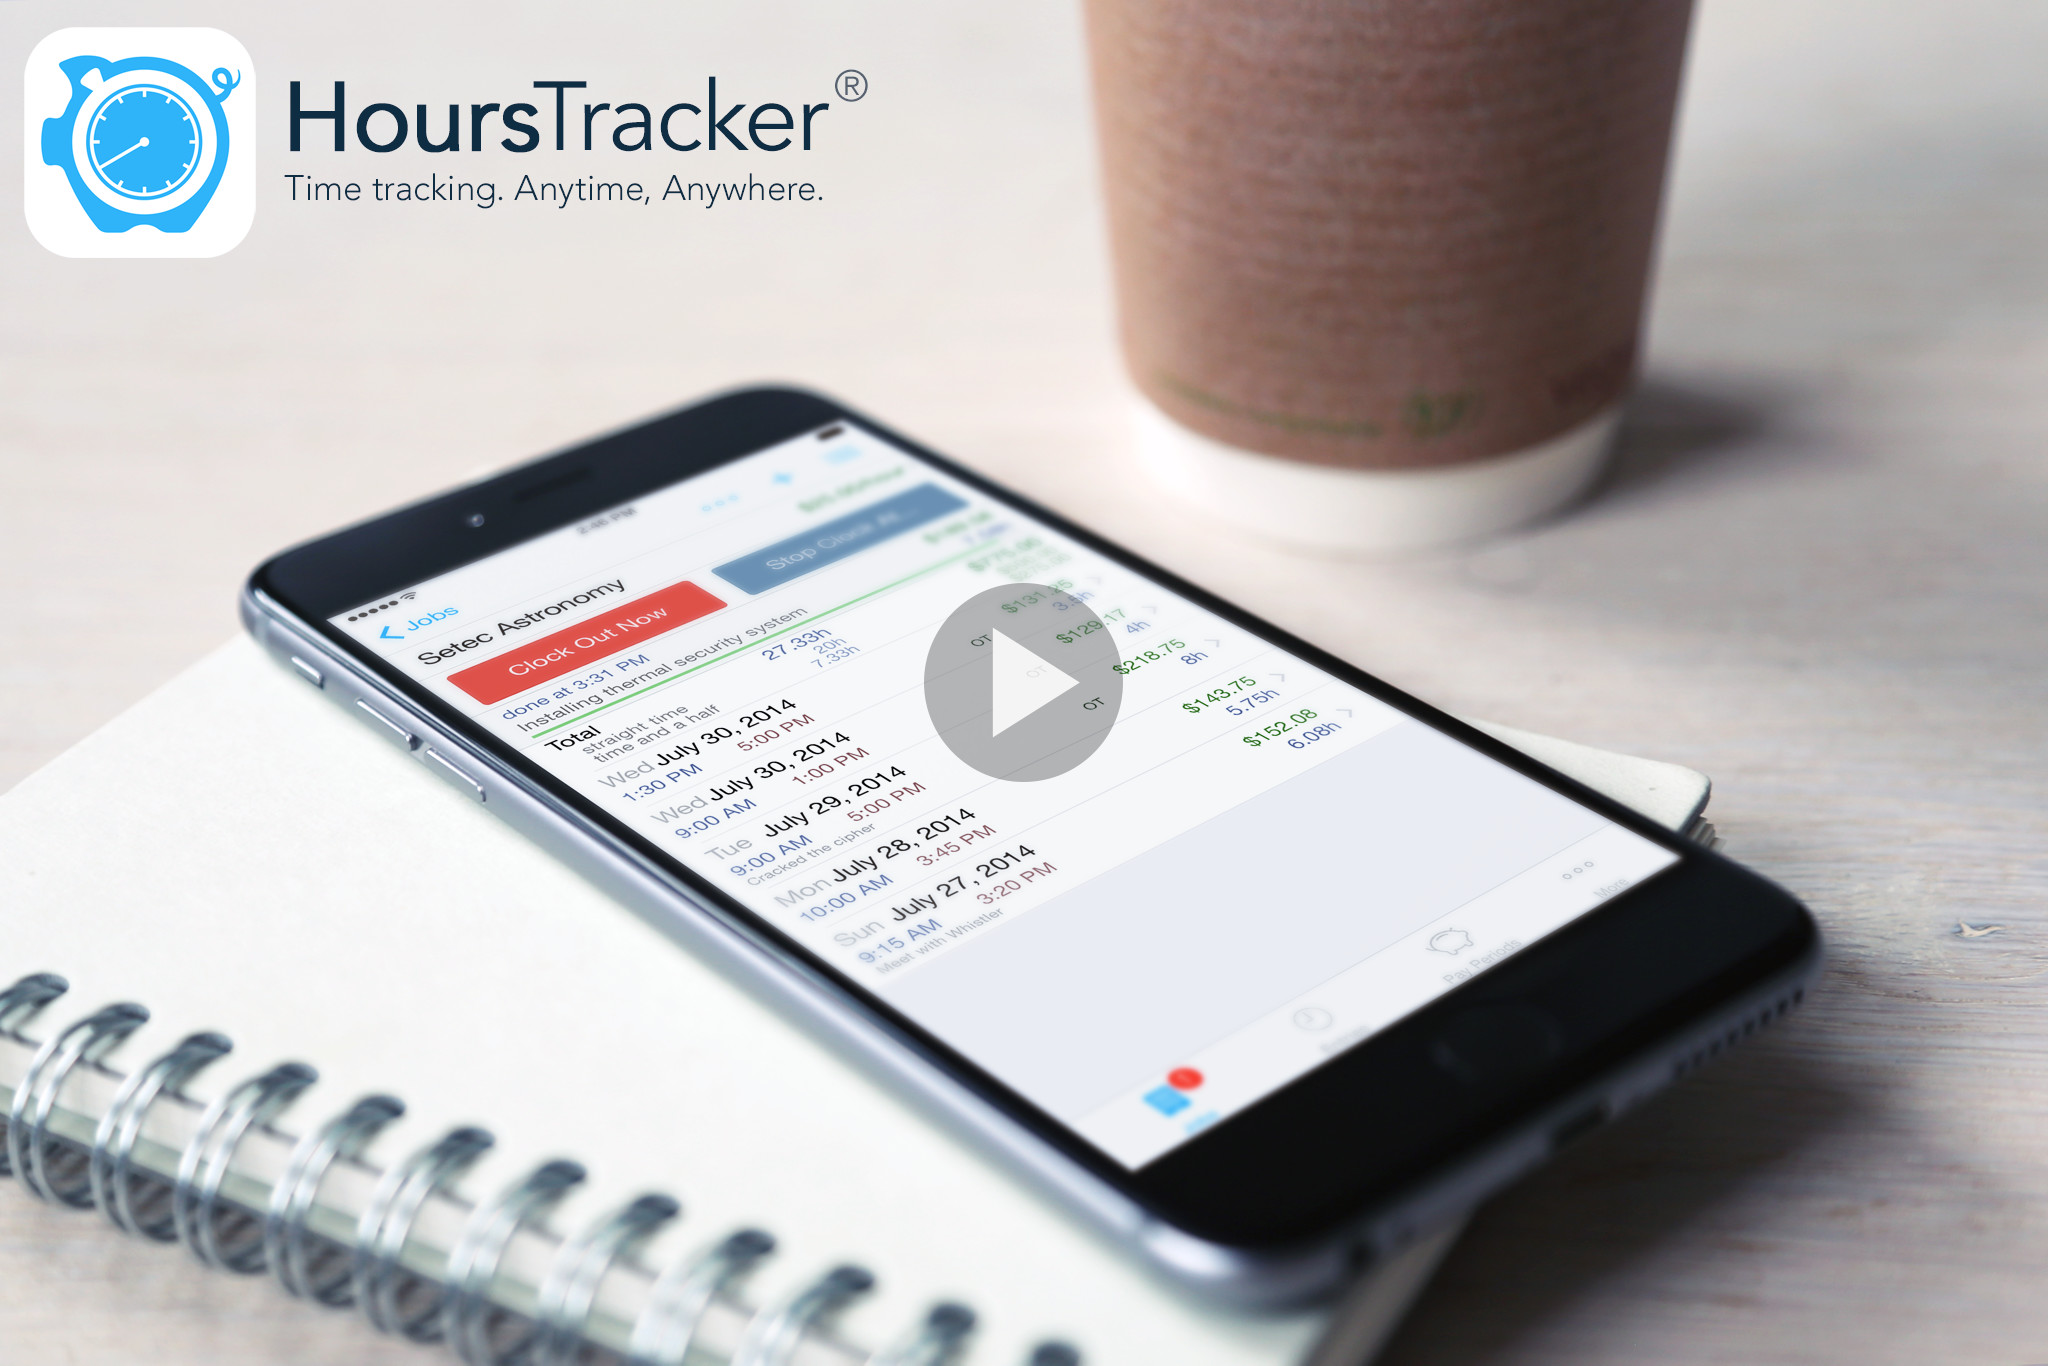 HoursTracker: Time Tracking. Anytime, Anywhere. Watch the video.